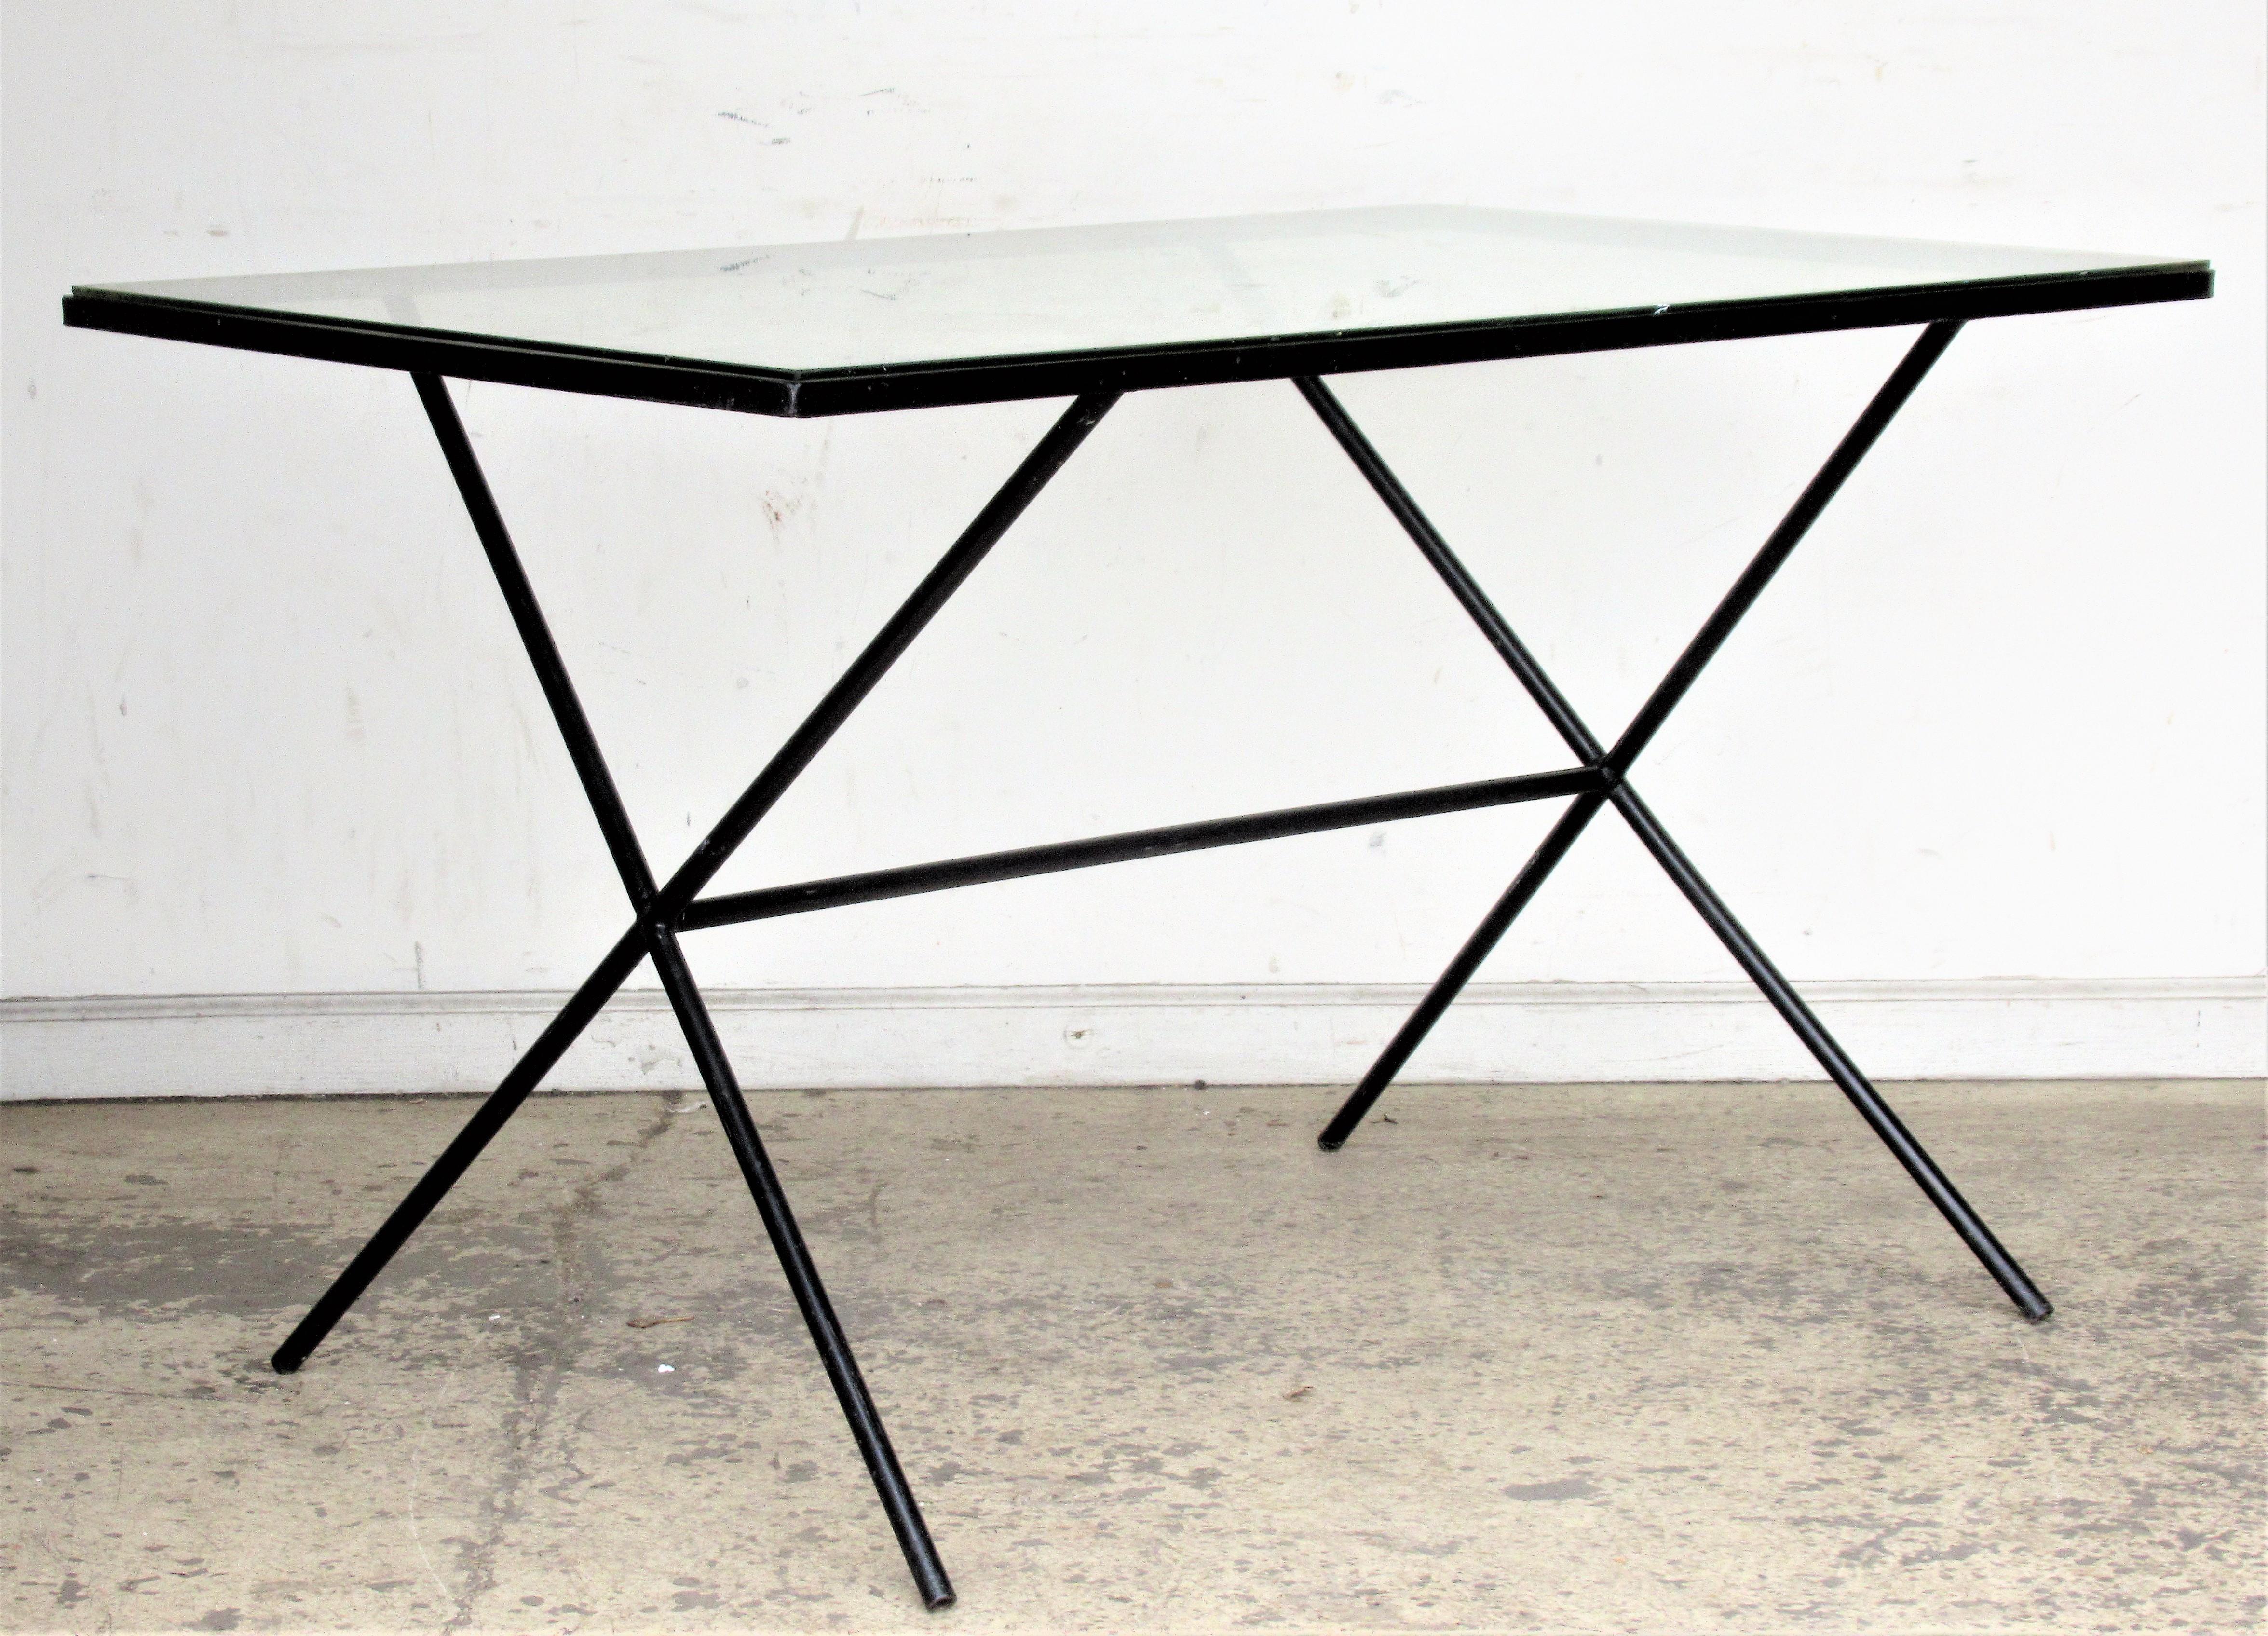  Architectural Modernist Iron Table by Muriel Coleman 9